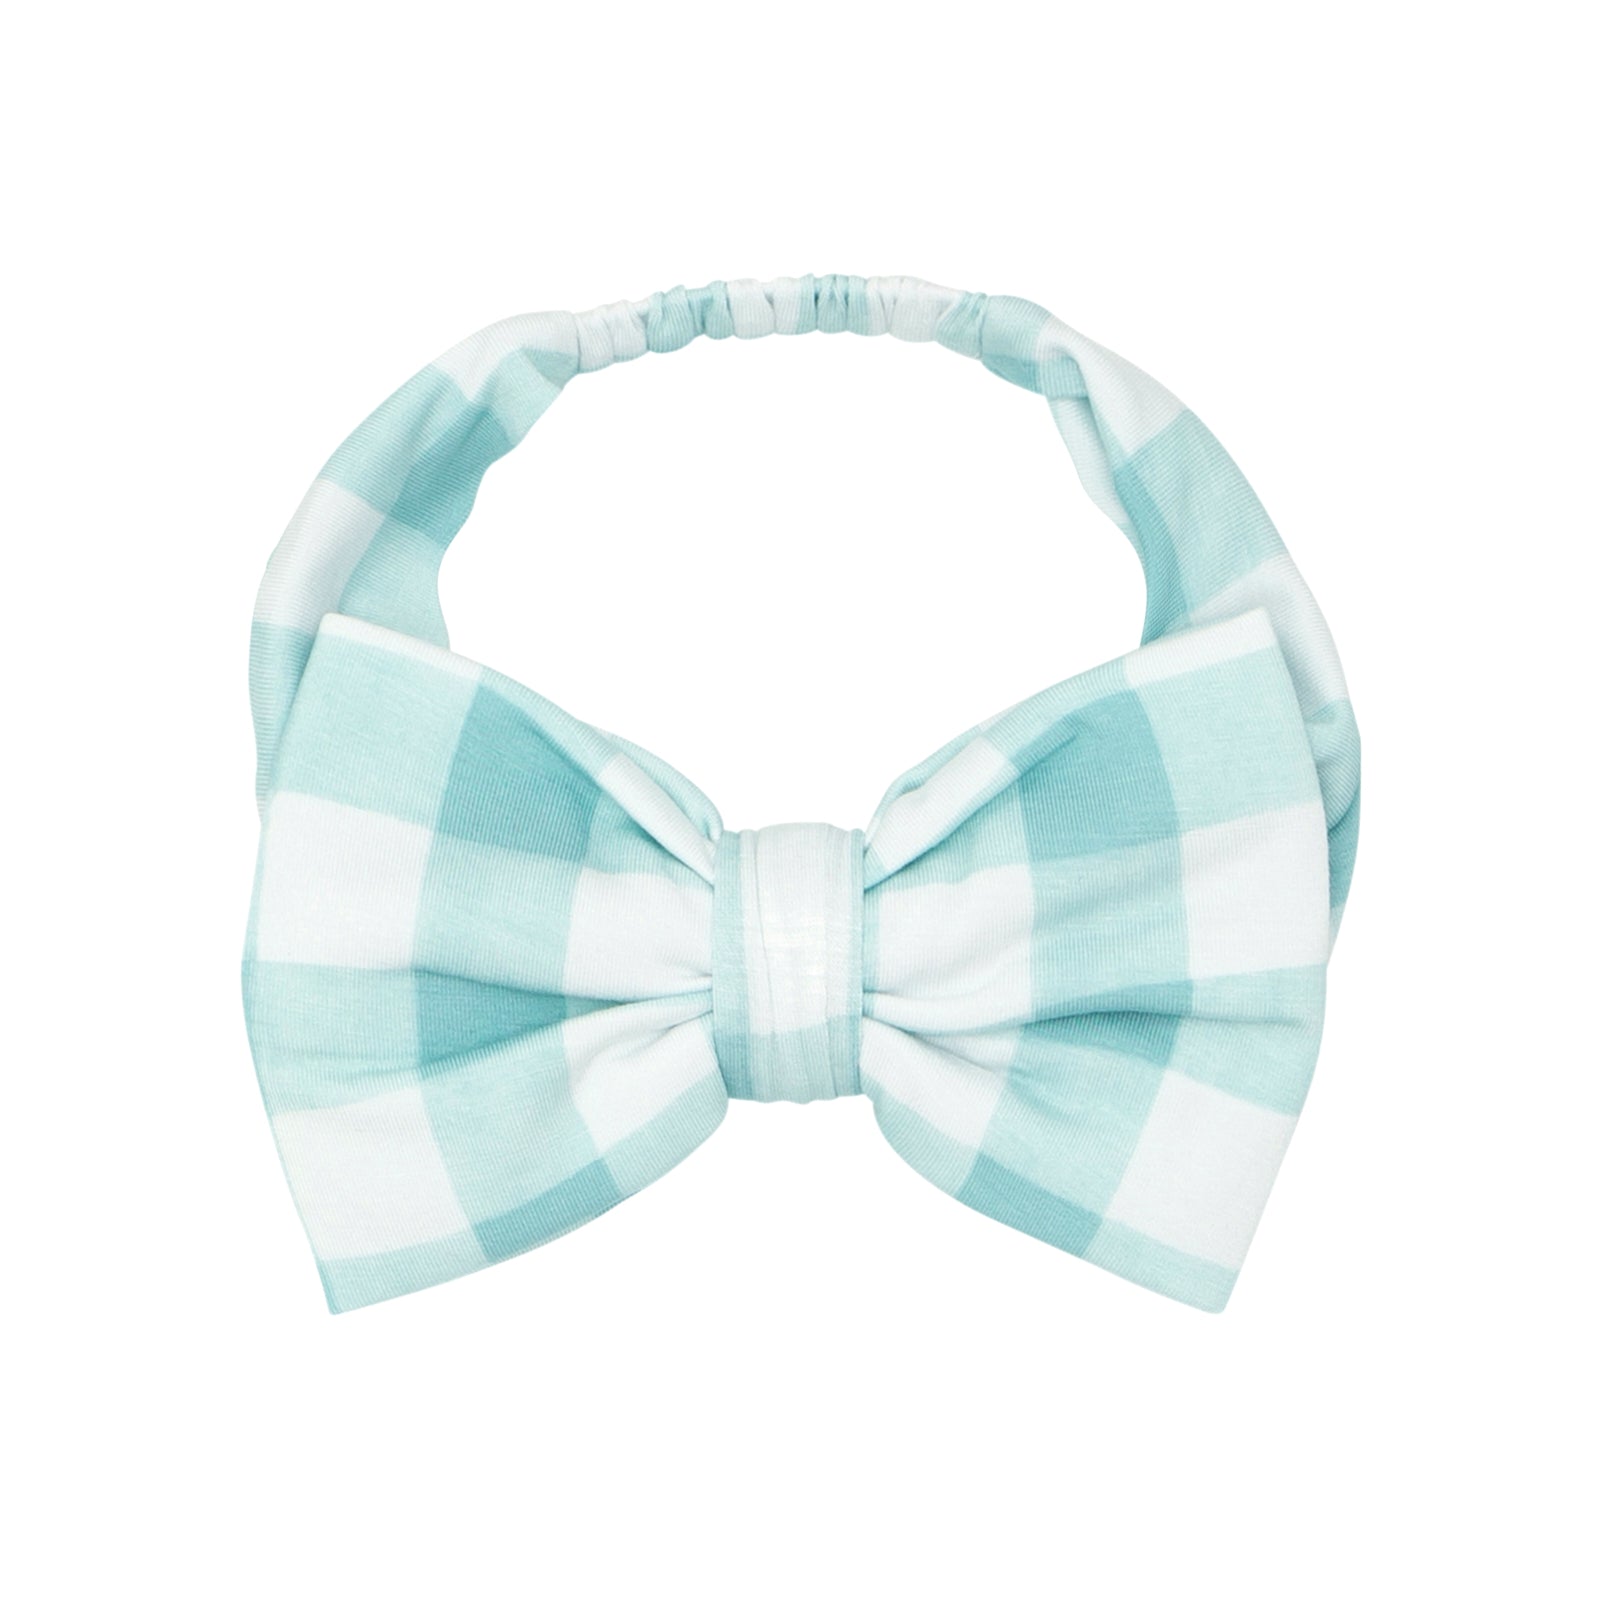 Flat lay image of an Aqua Gingham luxe bow headband in size age four to age 8